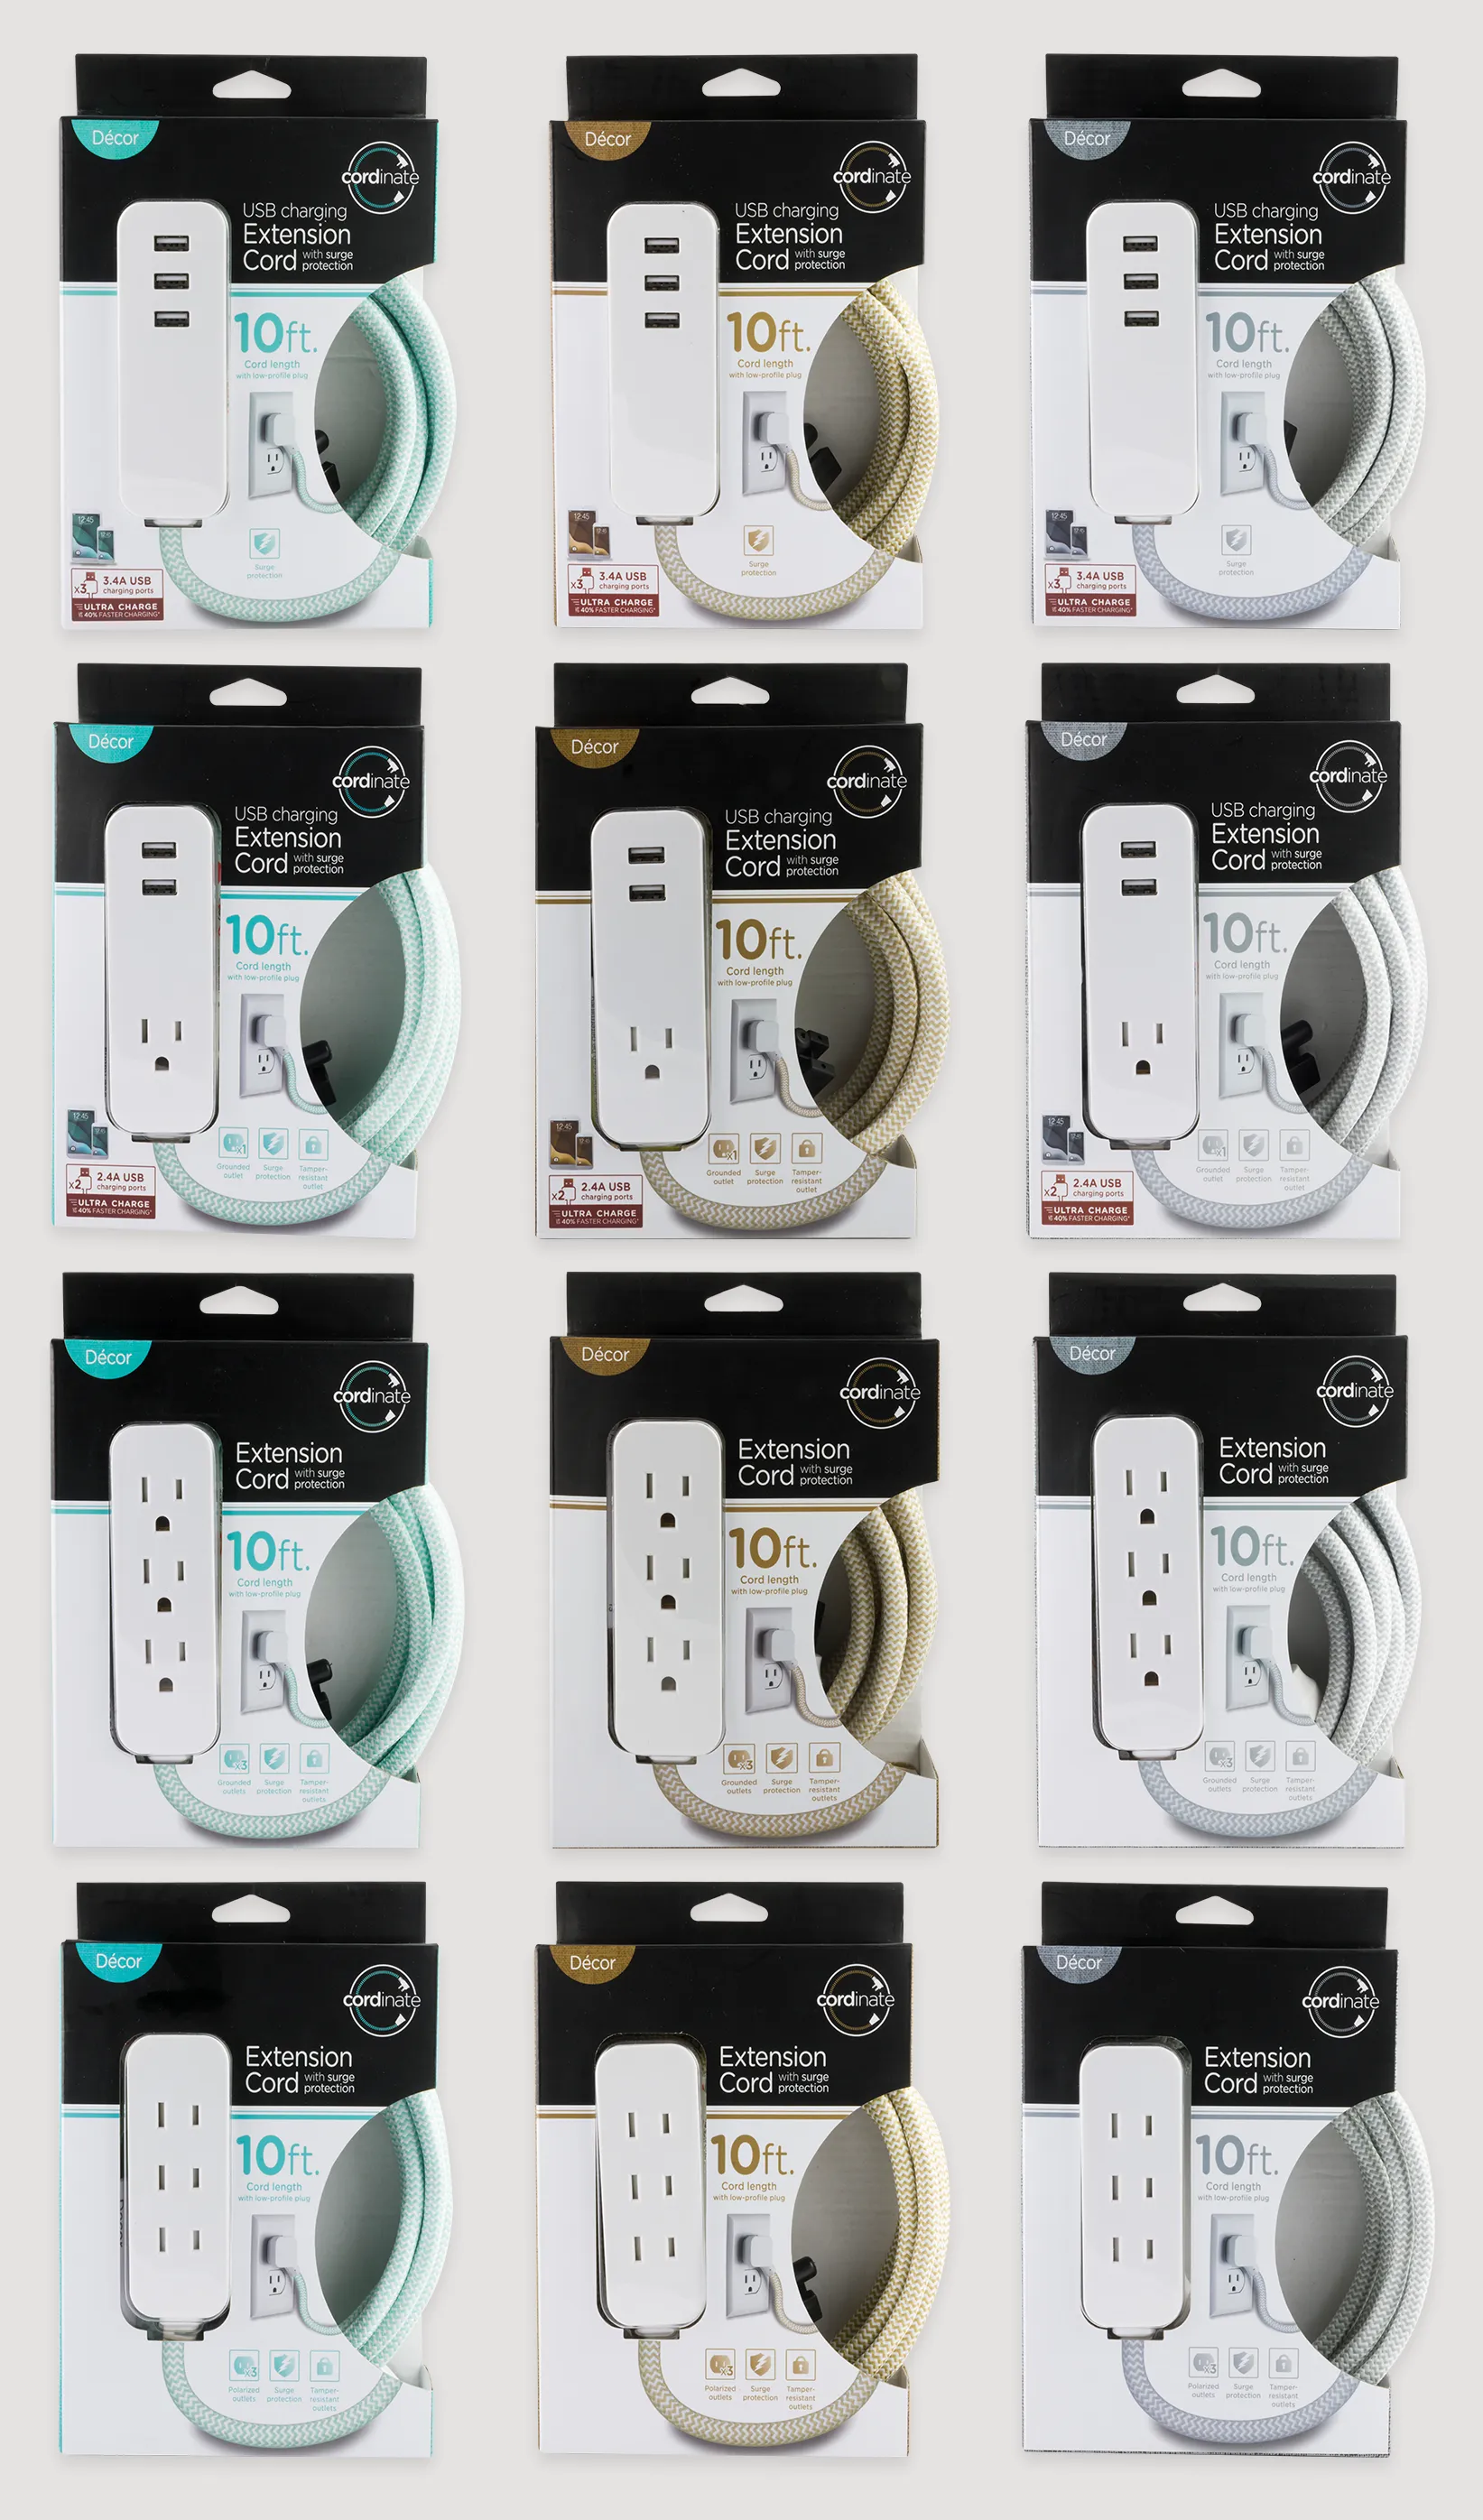 Three columns show straight-on images of the USB extension cord packaging in blue, brown, and gray colors and with different features.